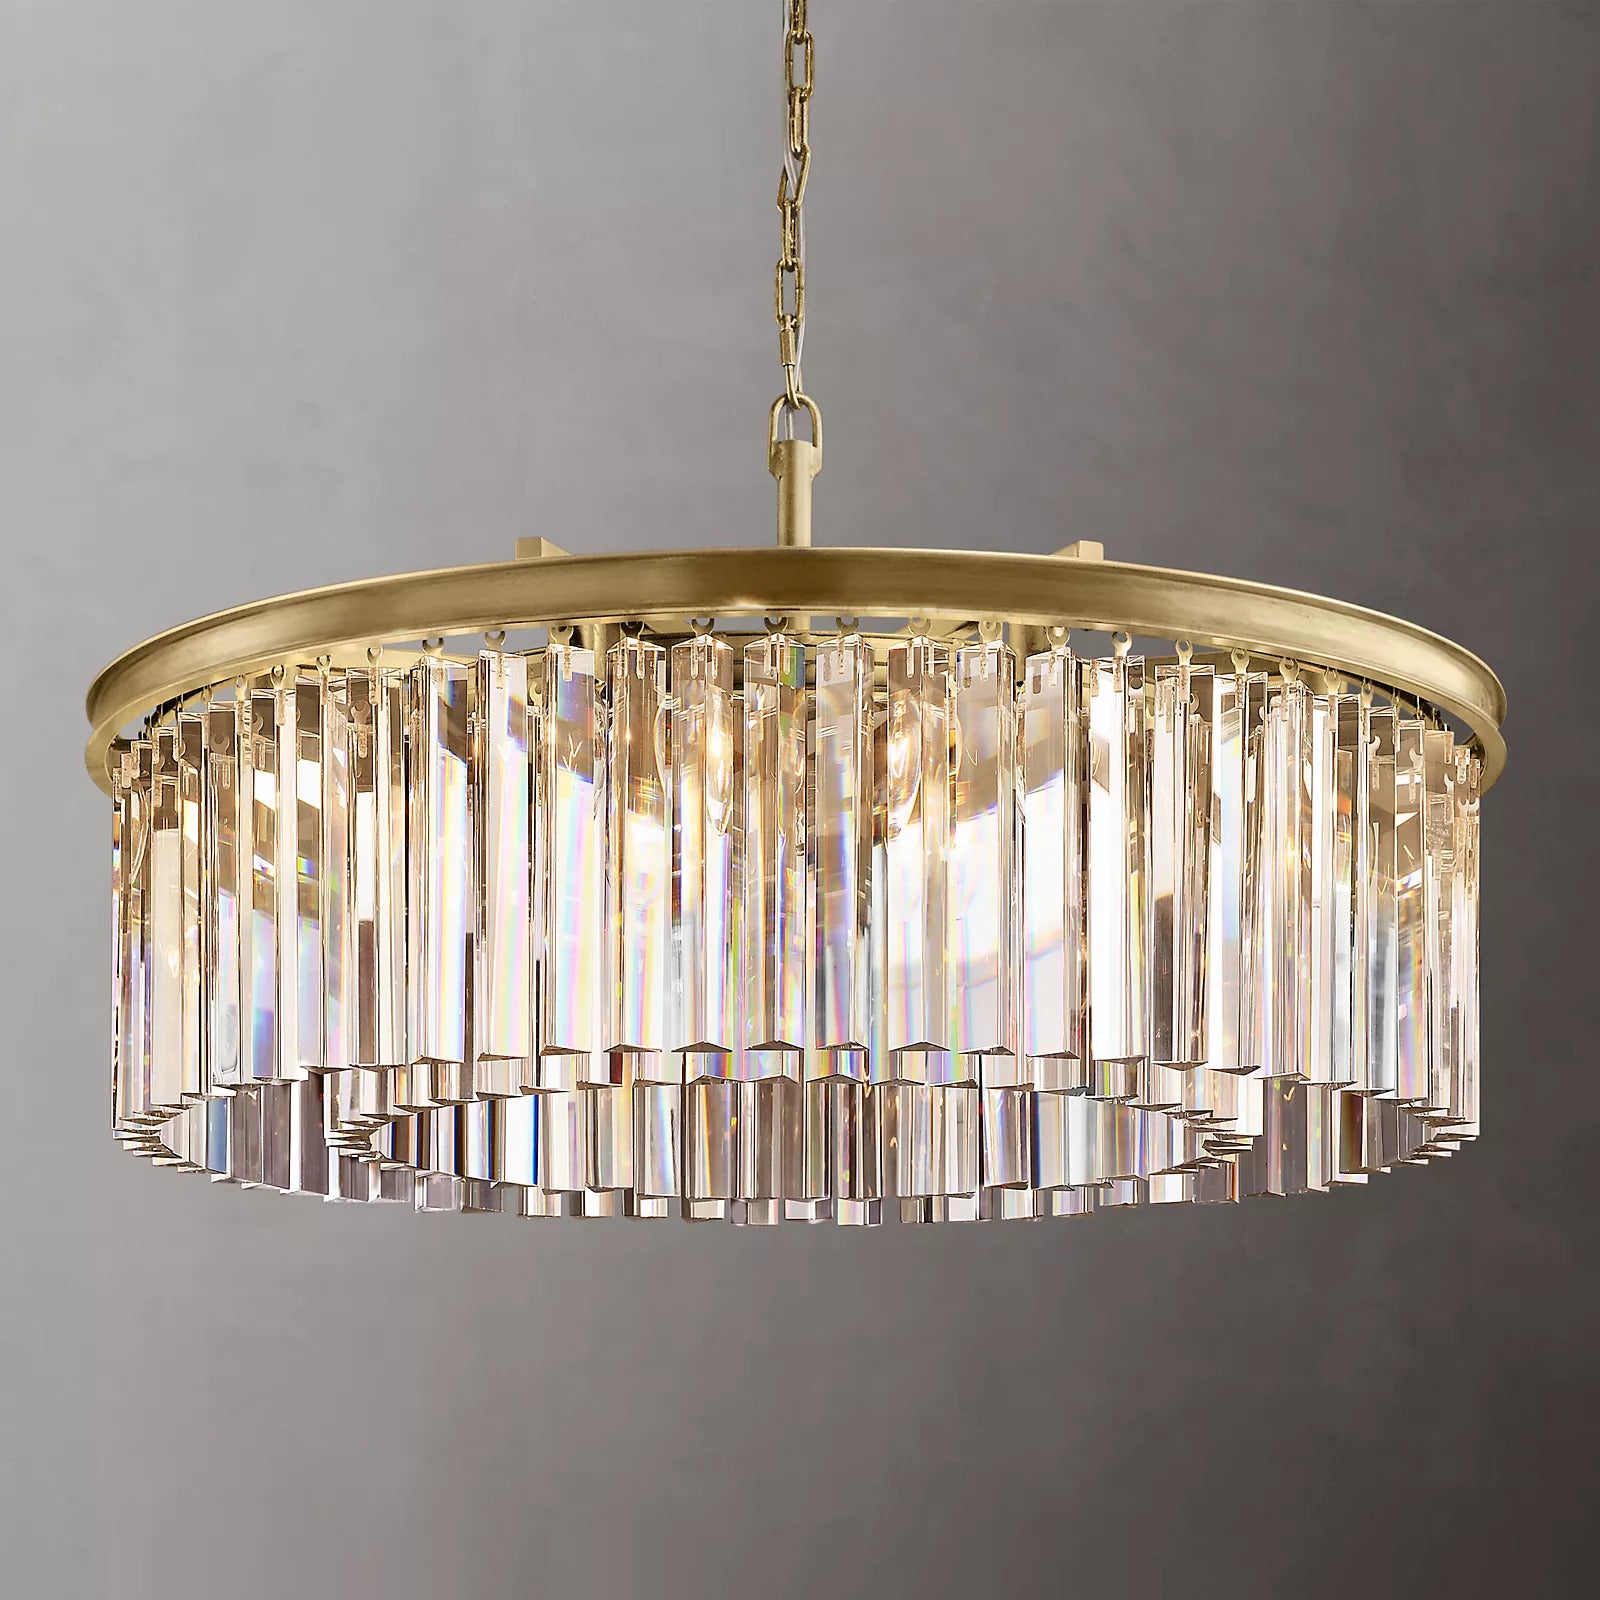 Royal Crystal Round Chandelier Finish Lacquered Burnished Brass-alimialighting